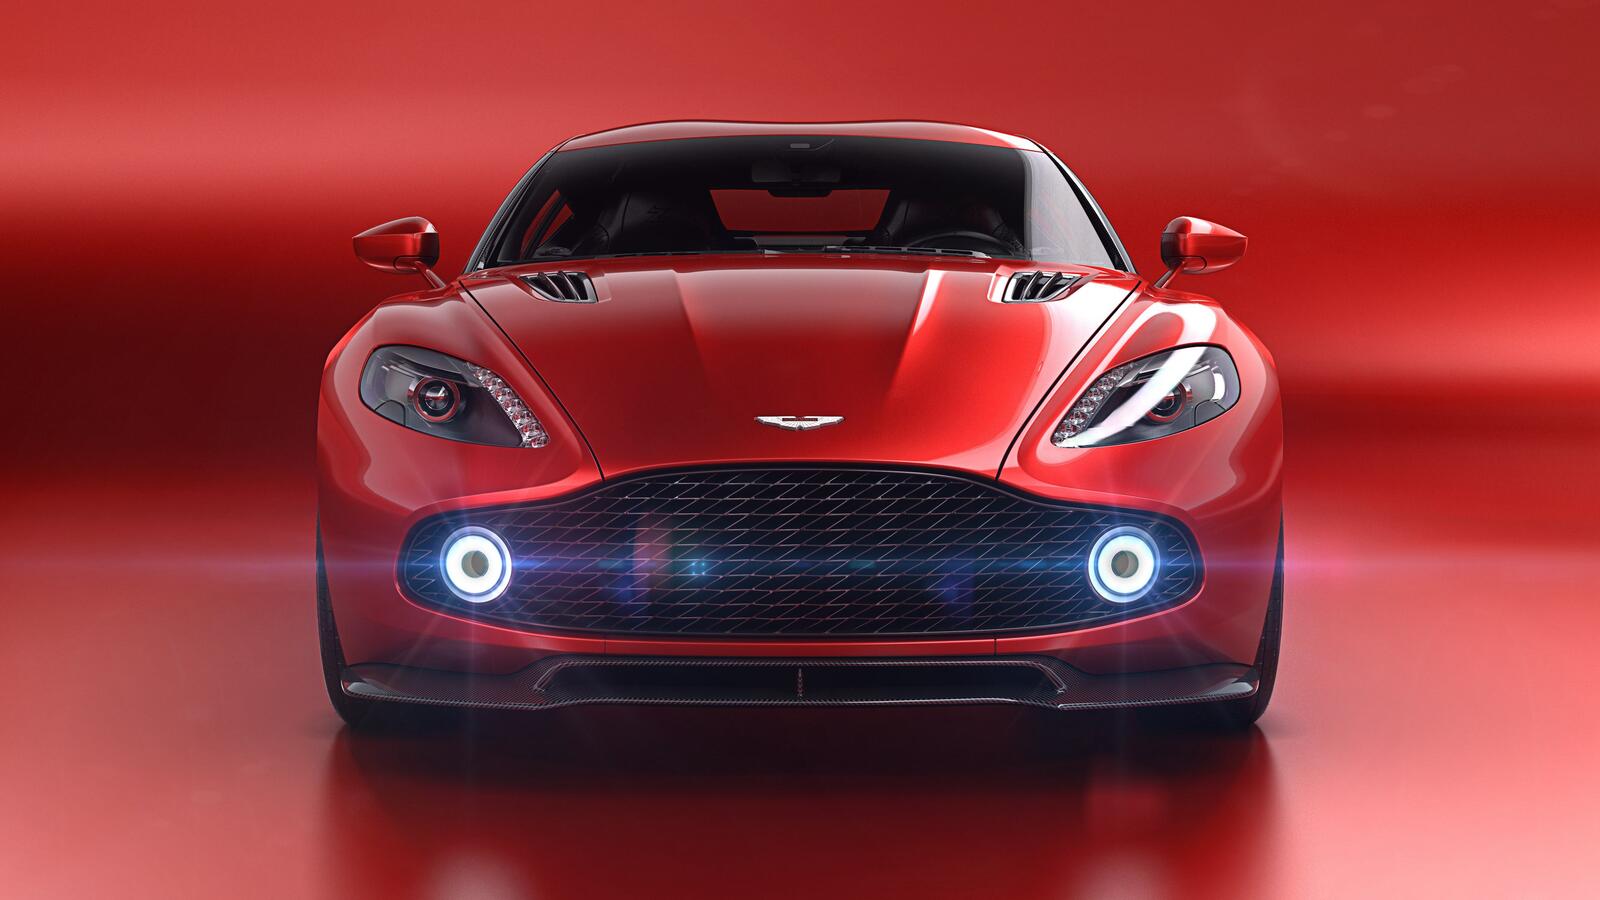 Free photo Red Aston Martin on a red background